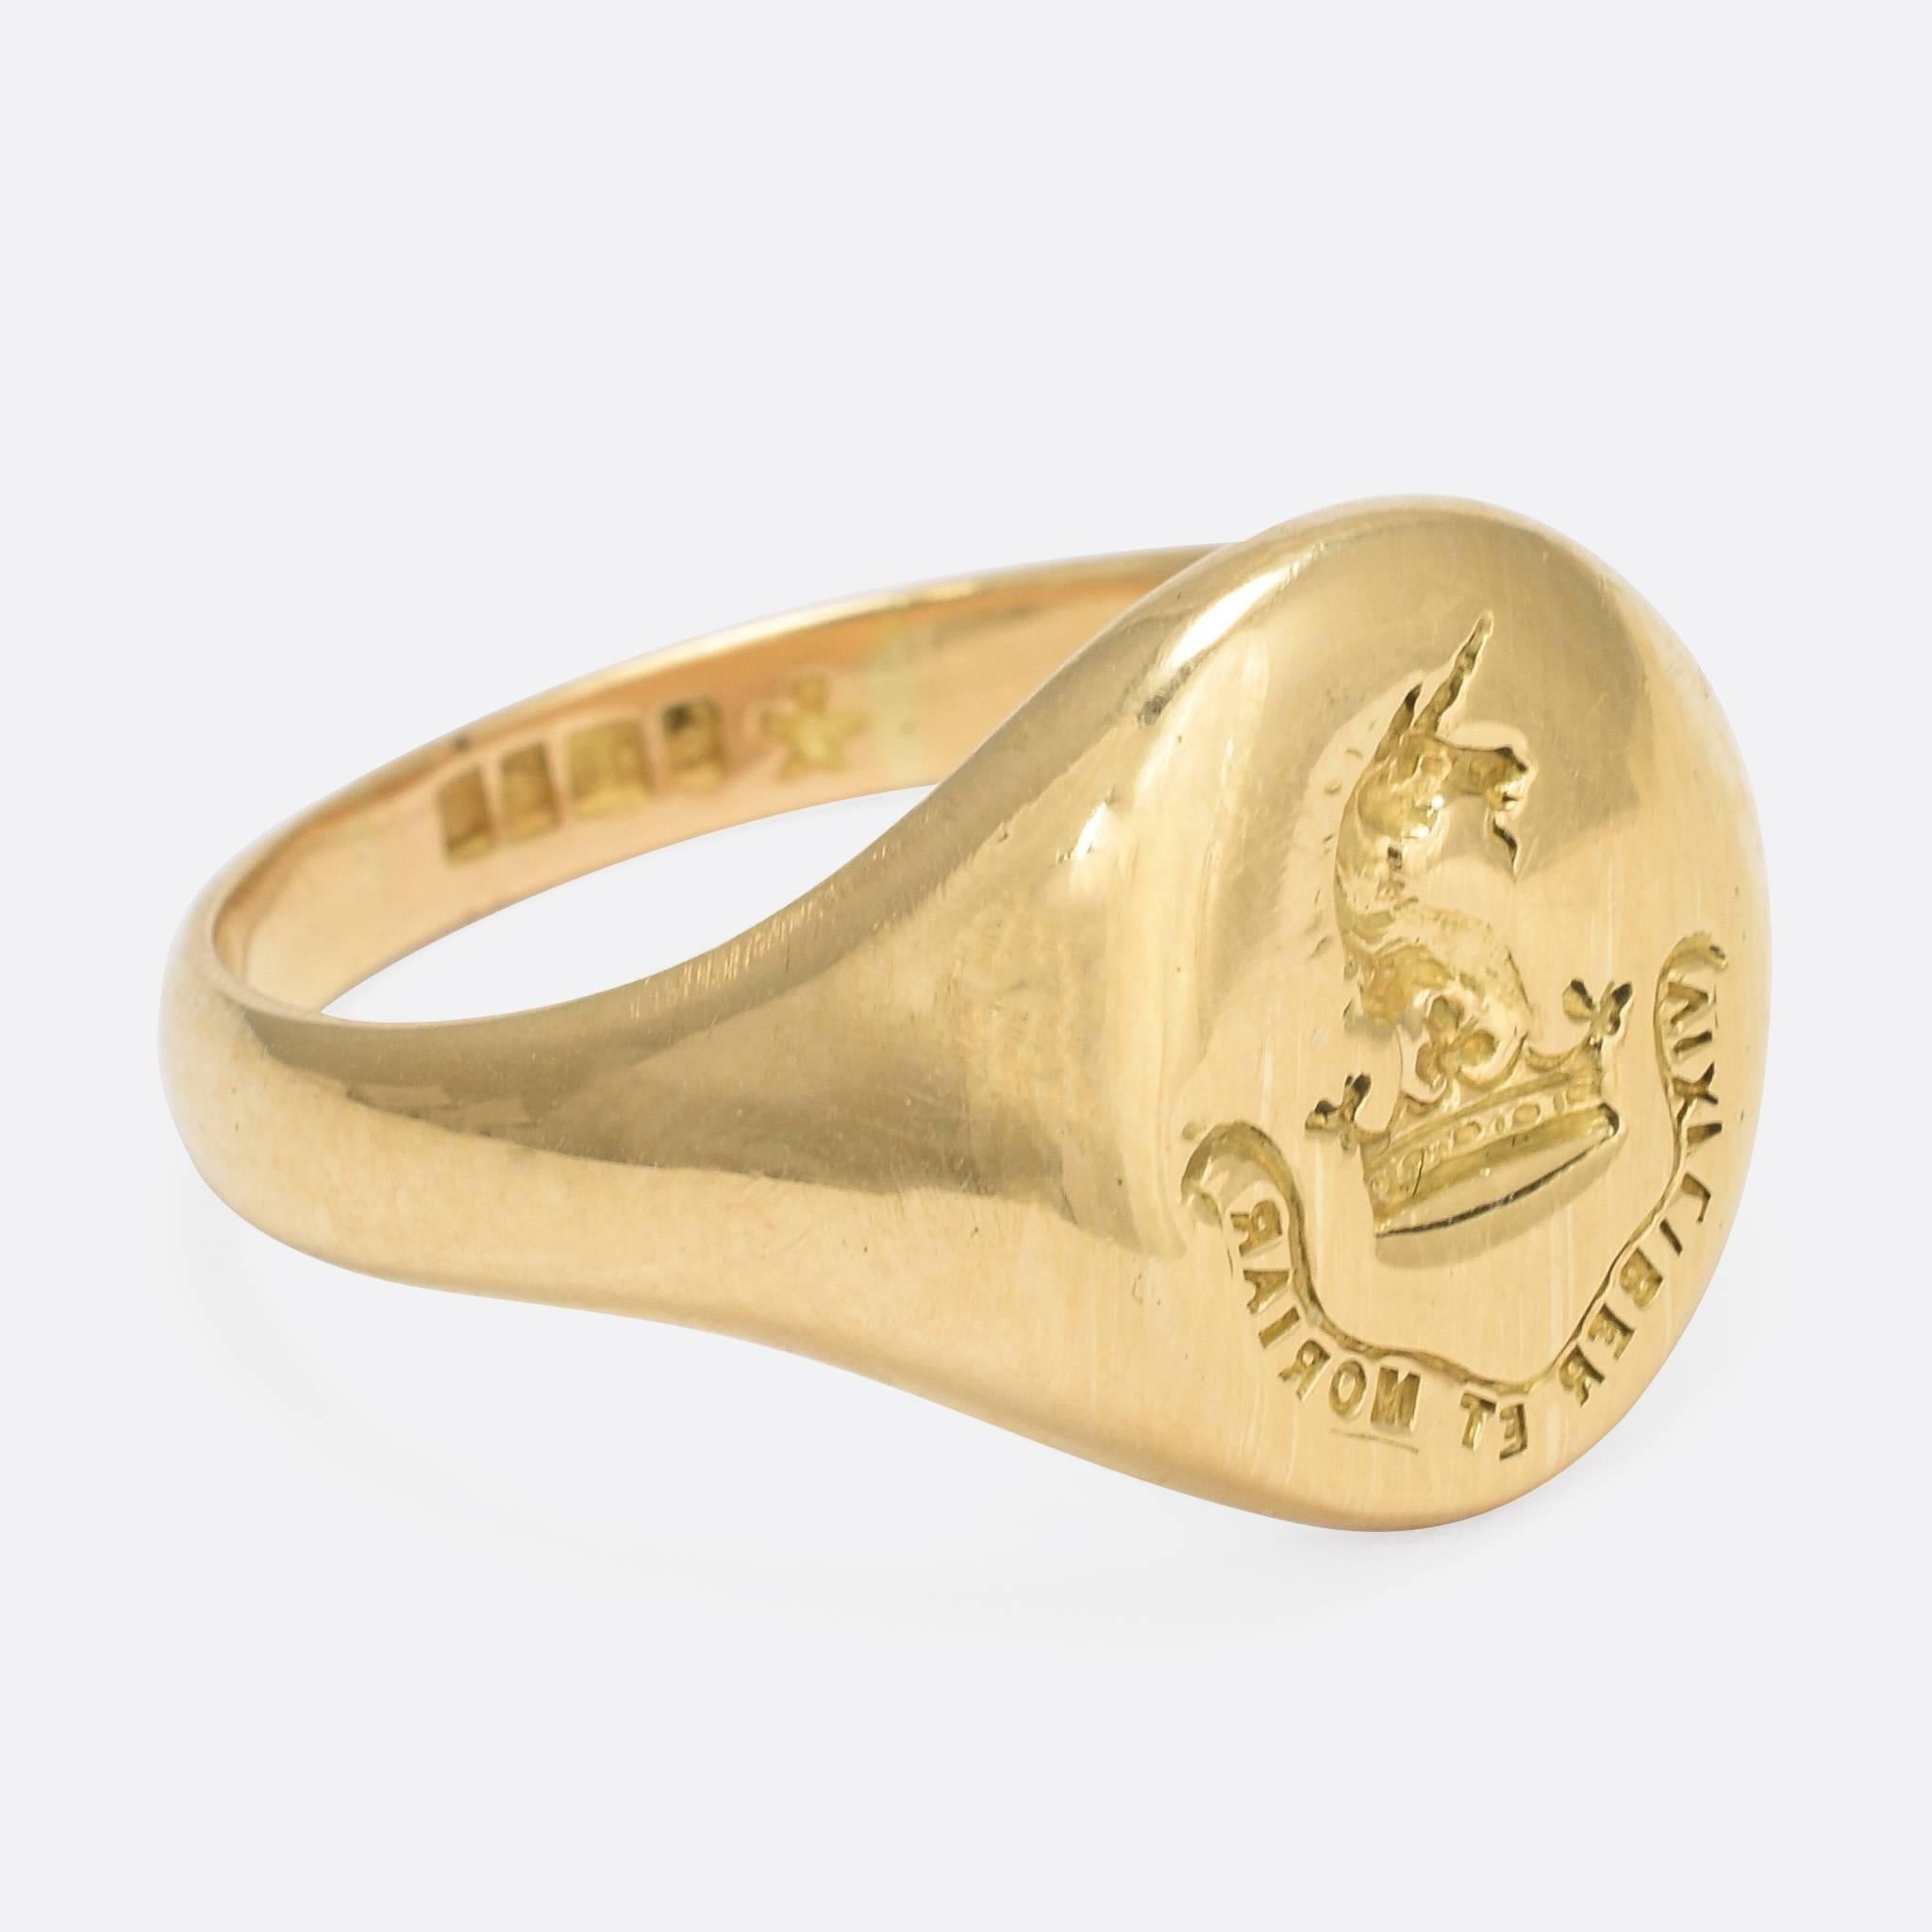 This cool Edwardian signet ring features an intaglio crest of a unicorn on a crown. Beneath is the Latin motto: VIXI LIBER ET MORIAR, or 